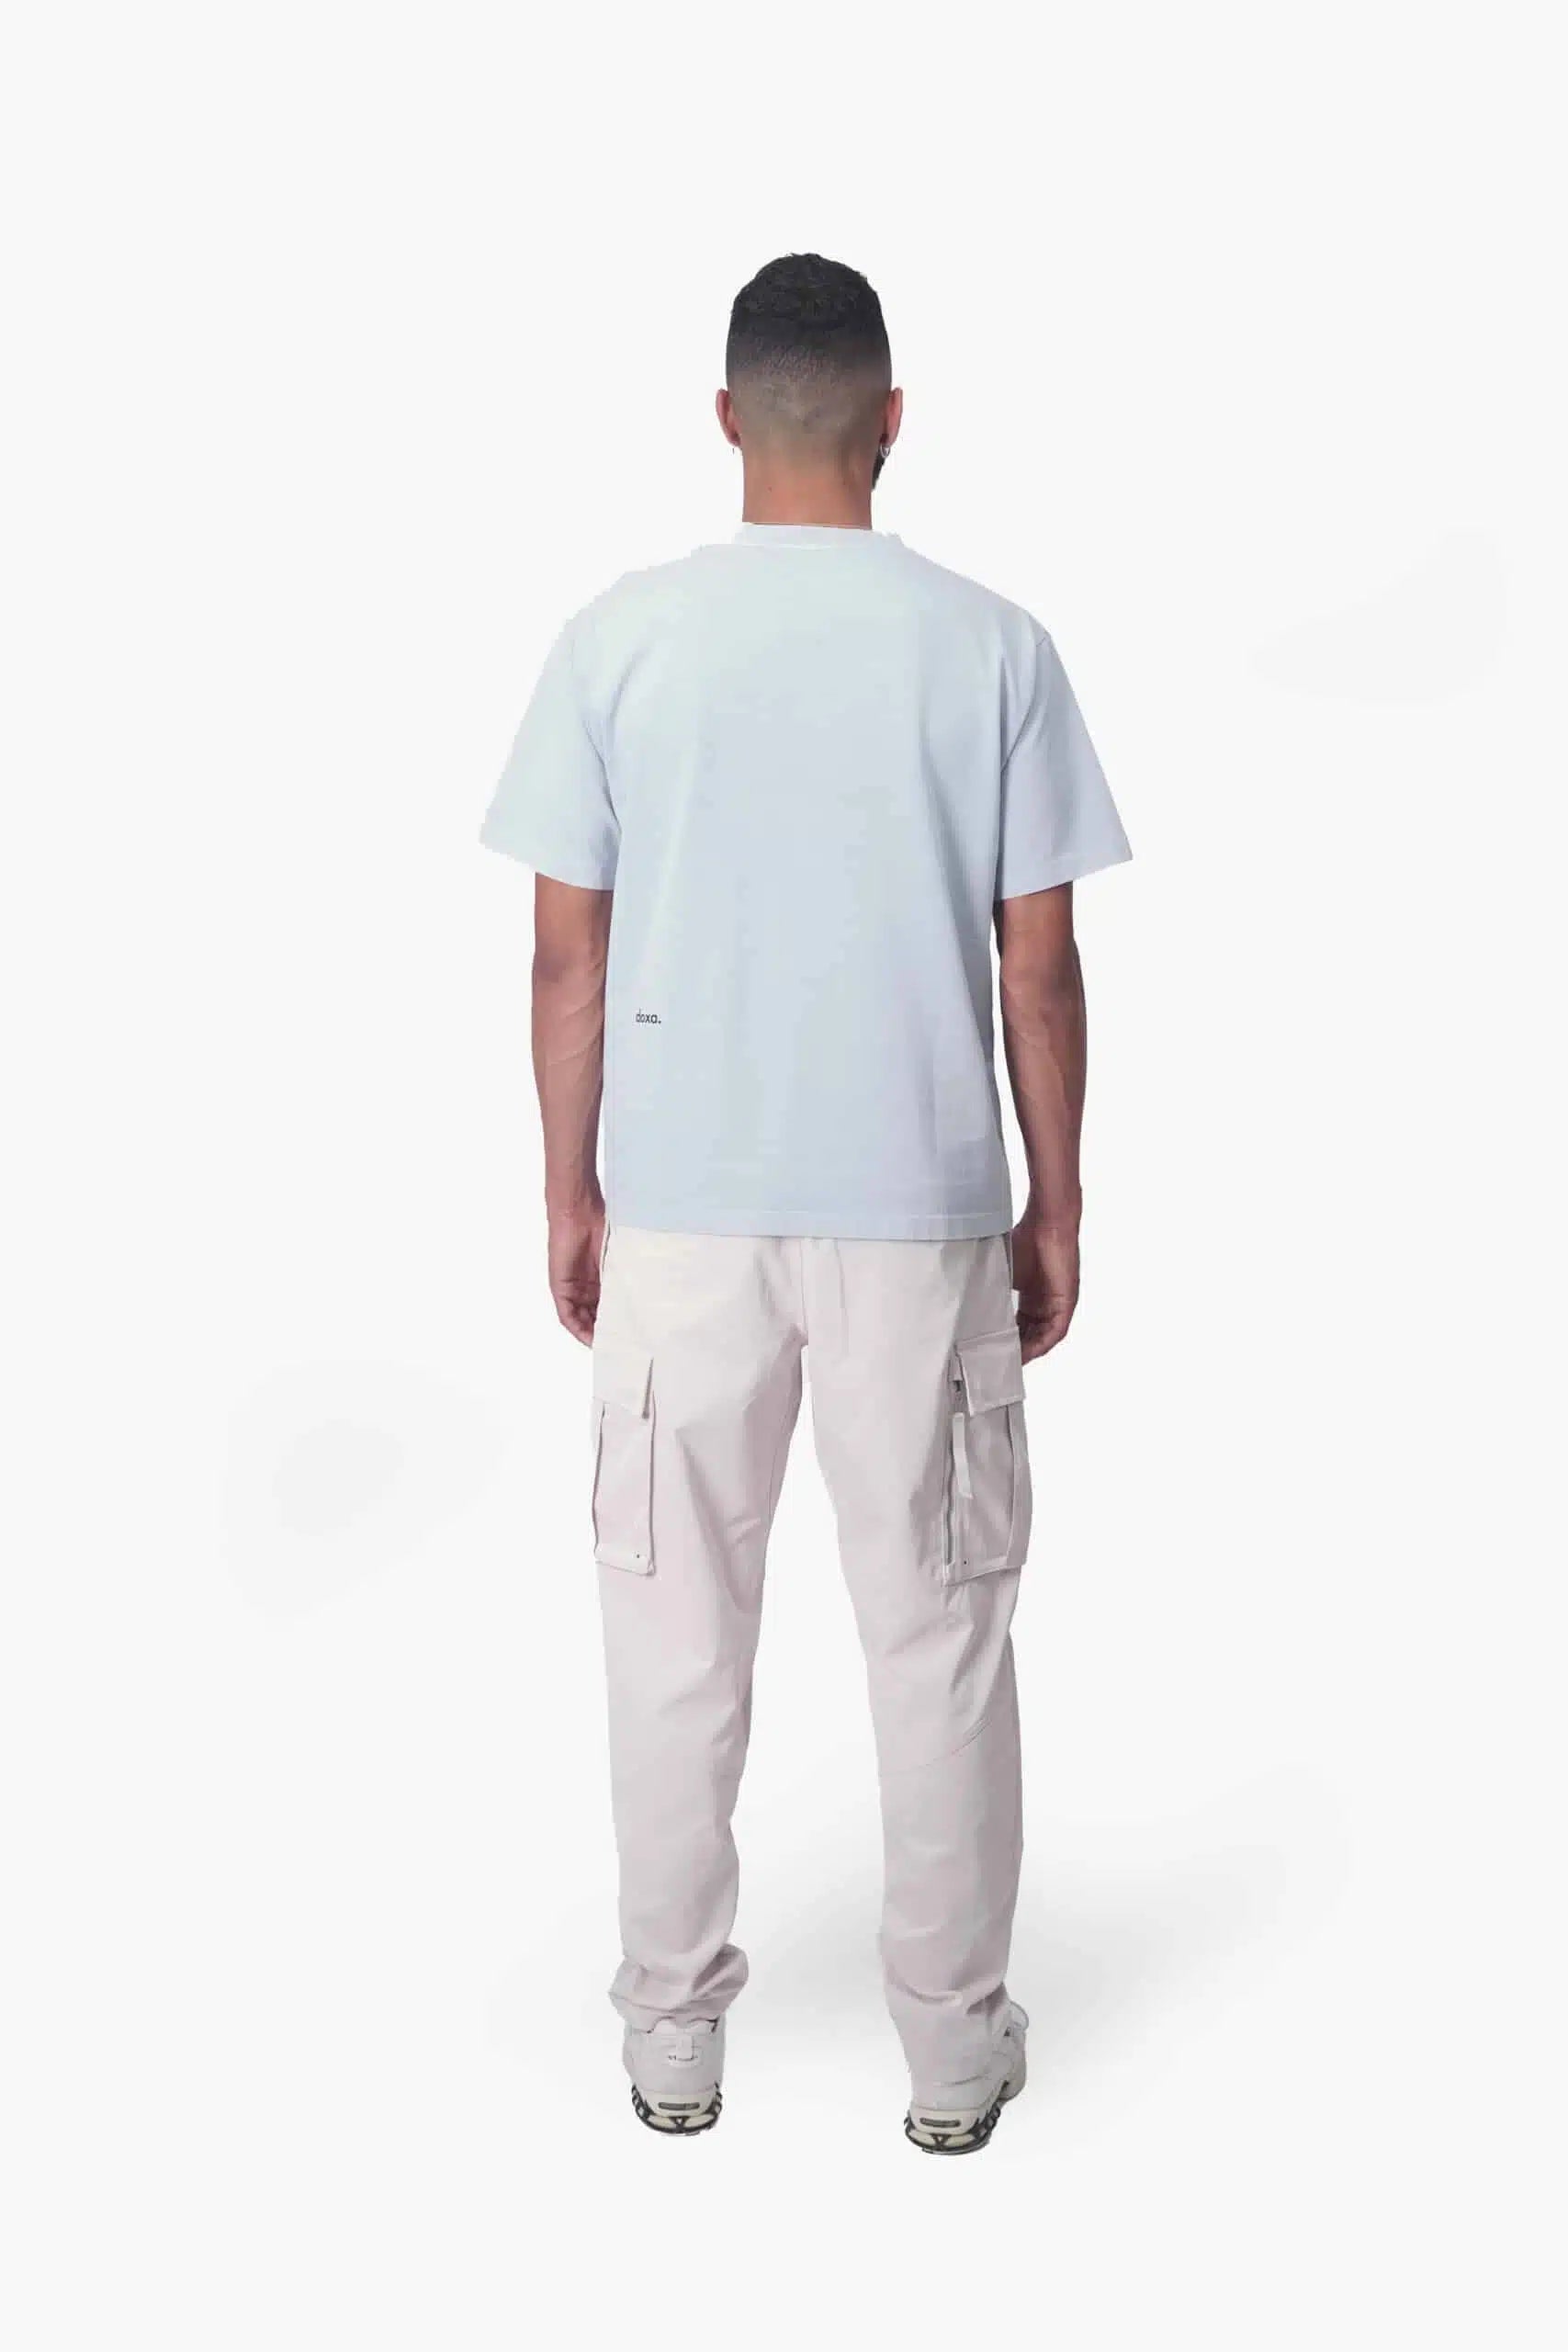 Man wearing a sustainable style light blue tee by DOXA, crafted with natural mineral dye.